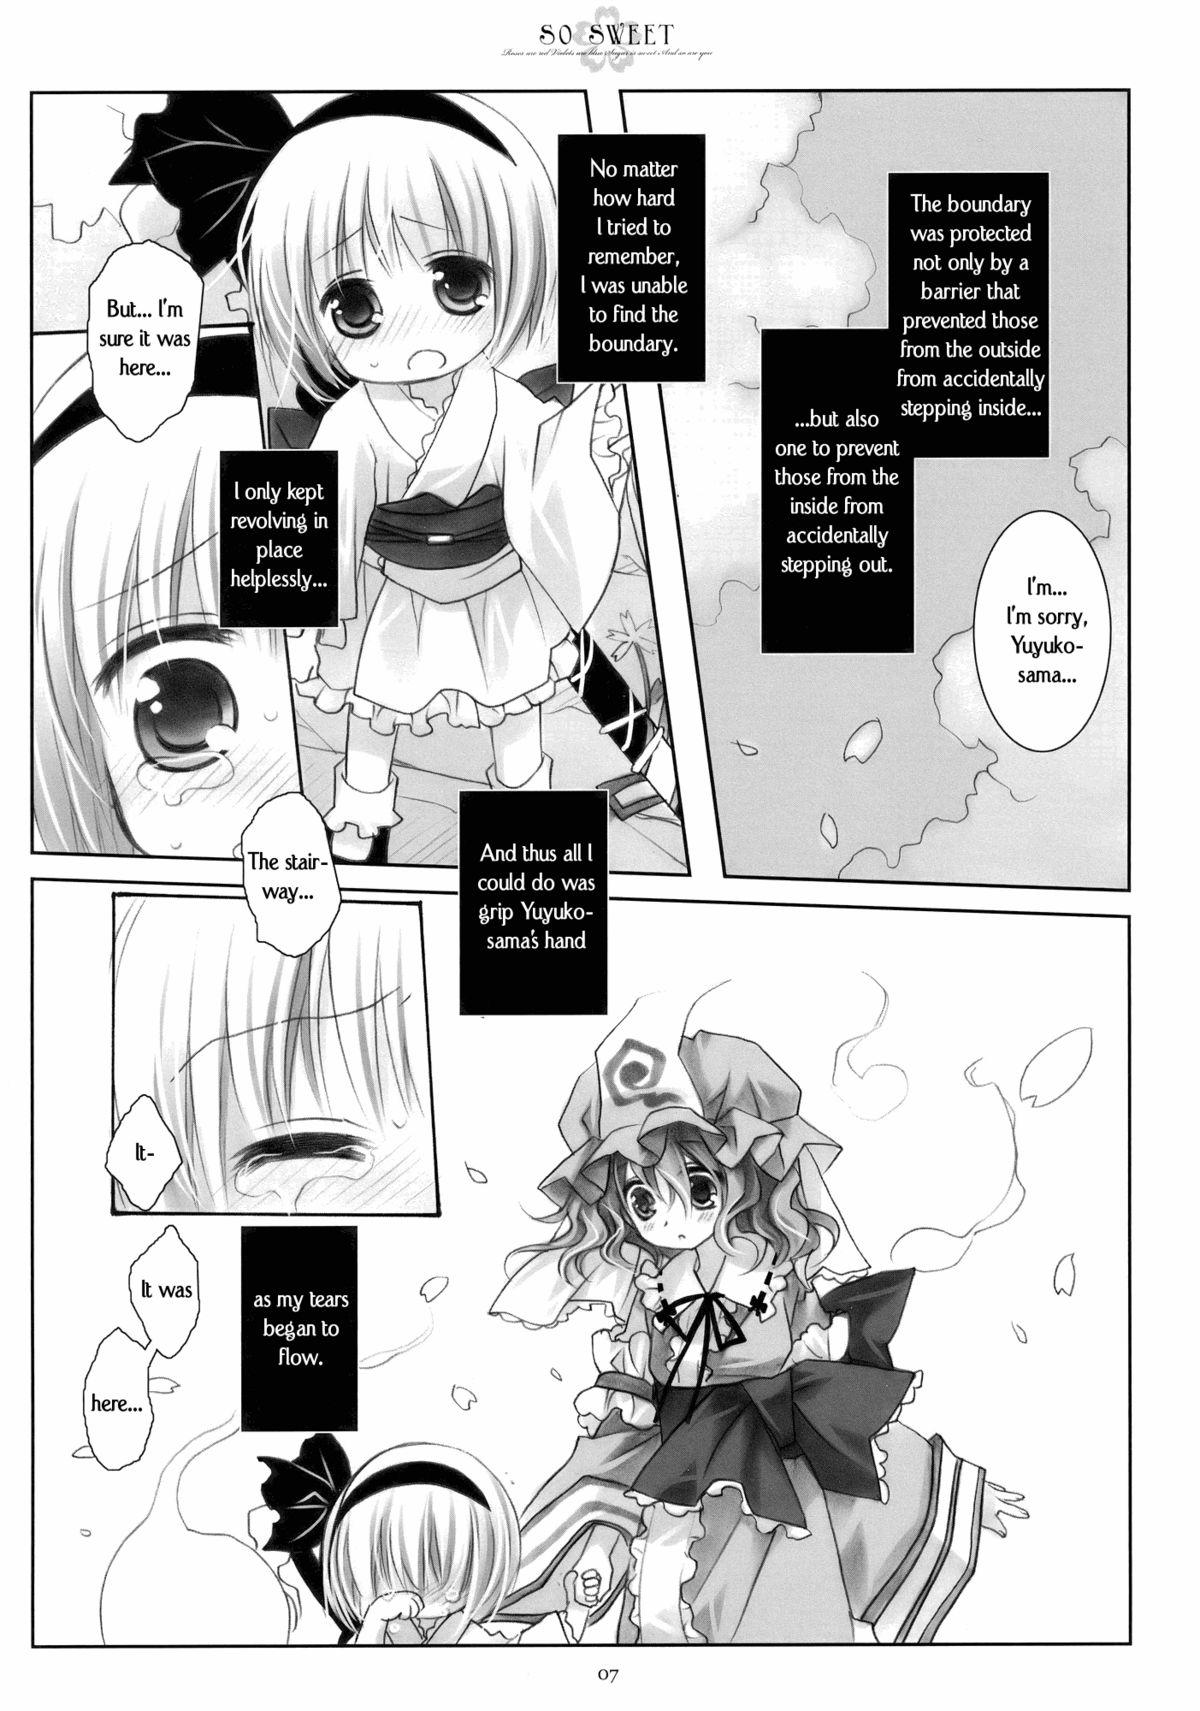 Tugging SO SWEET - Touhou project Vaginal - Page 6